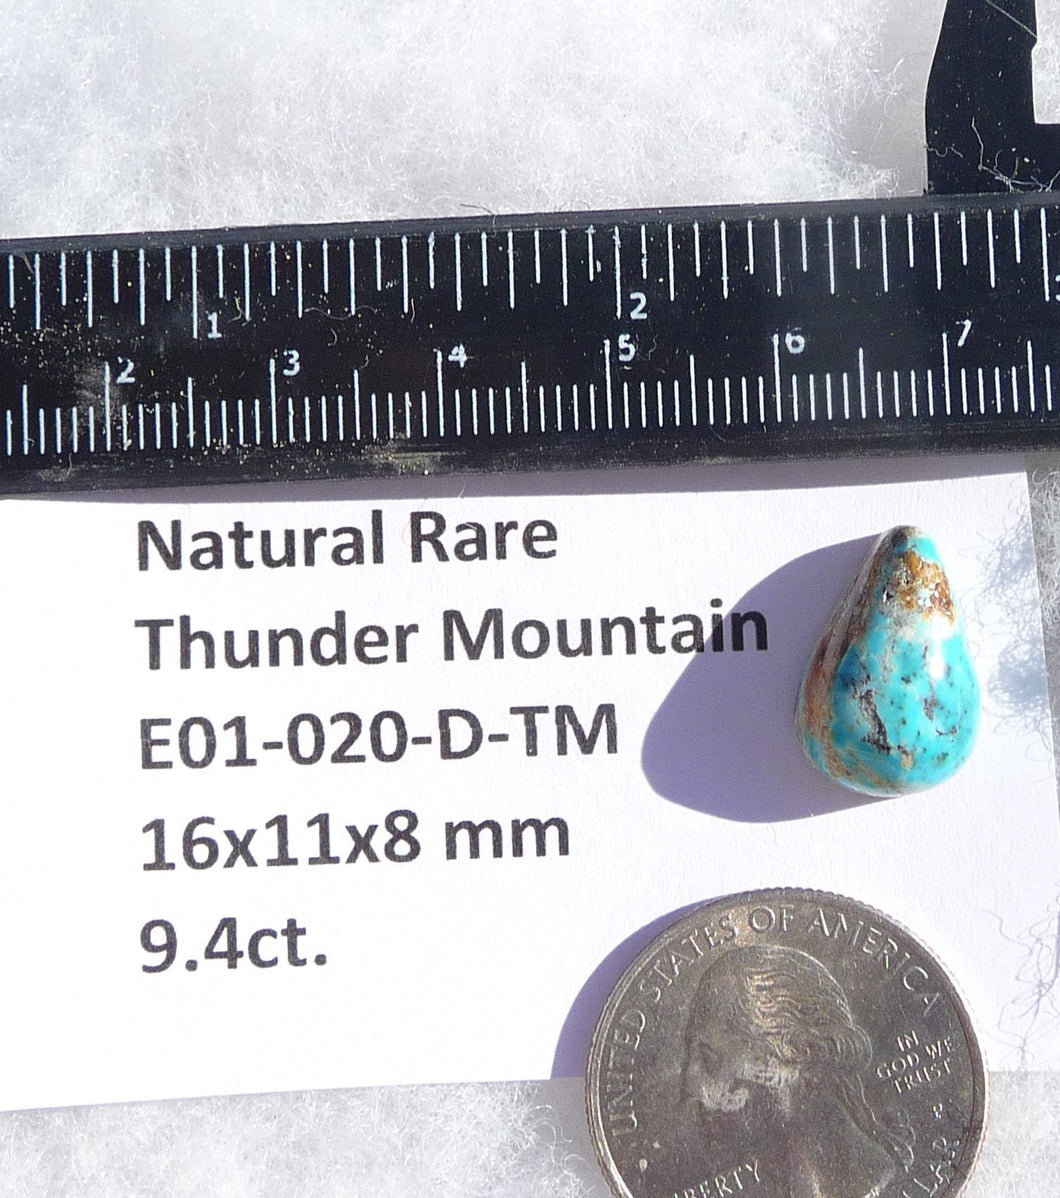 9.4 ct. Natural Rare Thunder Mountain Turquoise (Backed) 16x11x8 mm Cabochon, Gemstone E01-020-D-TM